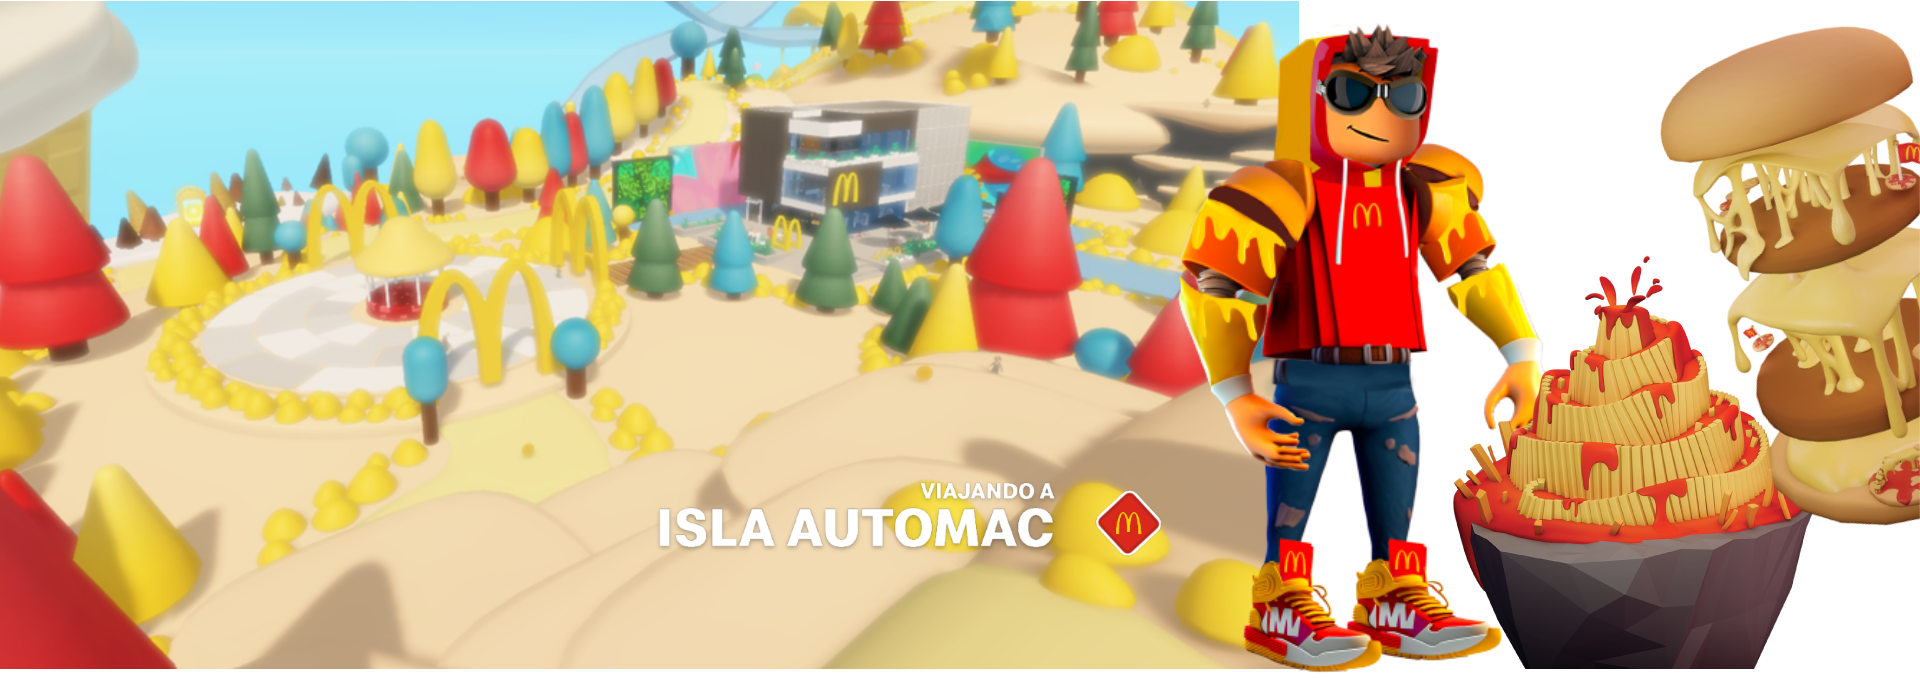 Image header for the experience created in roblox for mcdonalds, called mcdonalds land